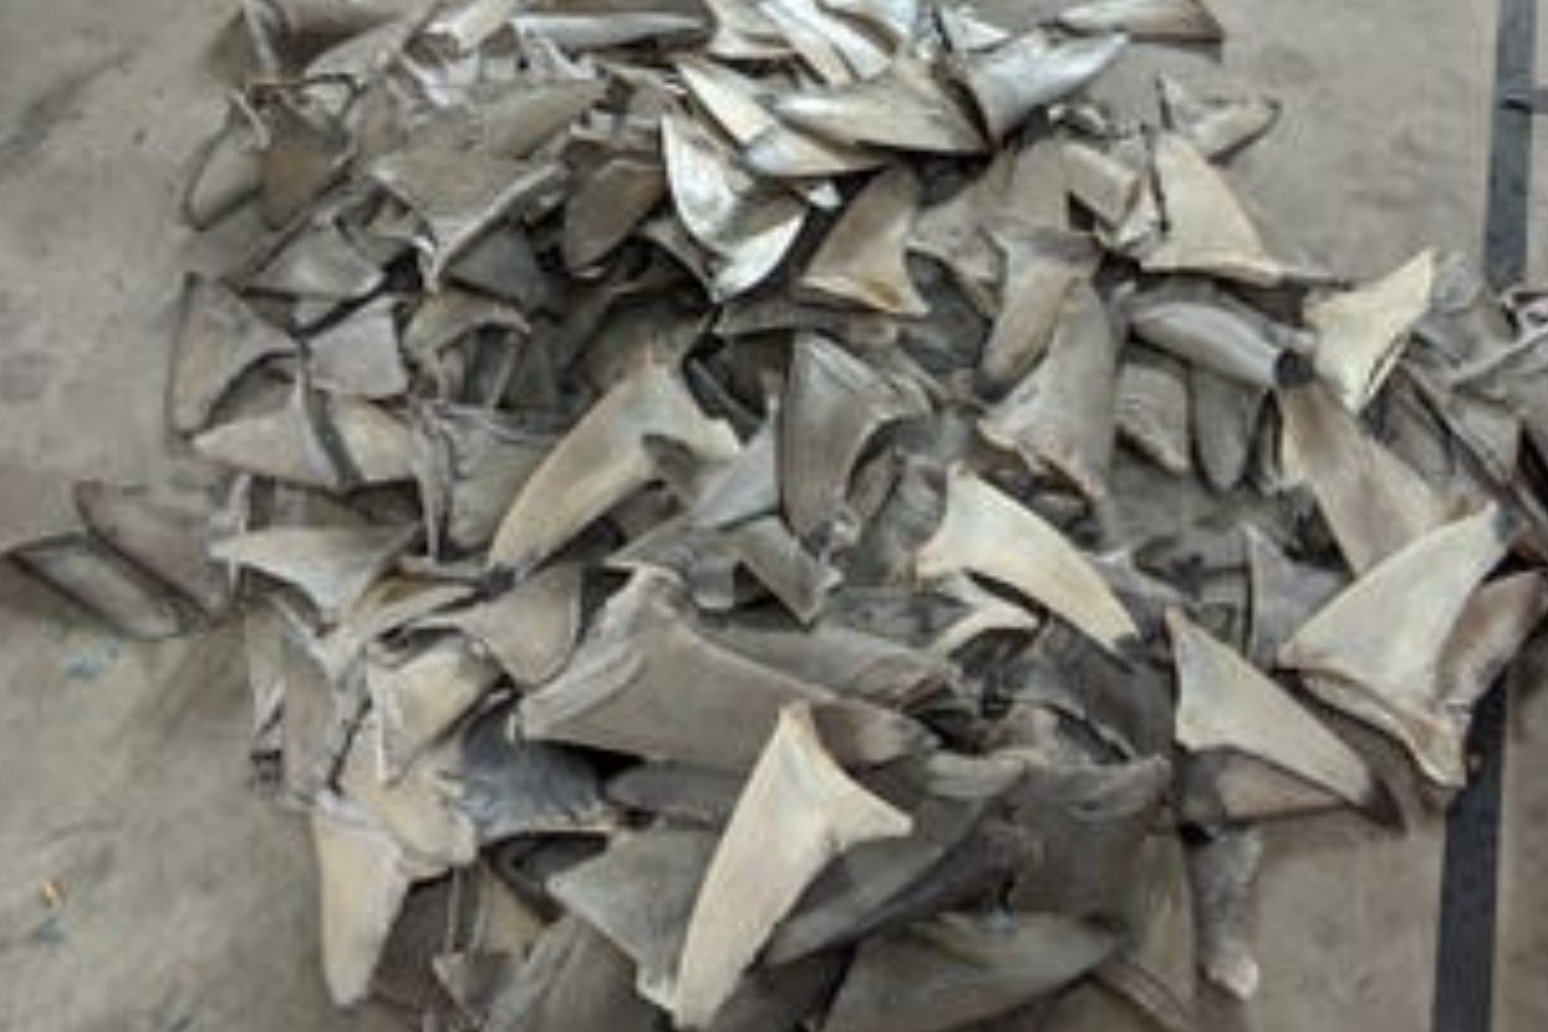 Shark fin ban set to give teeth to fight against ‘indescribably cruel’ trade 